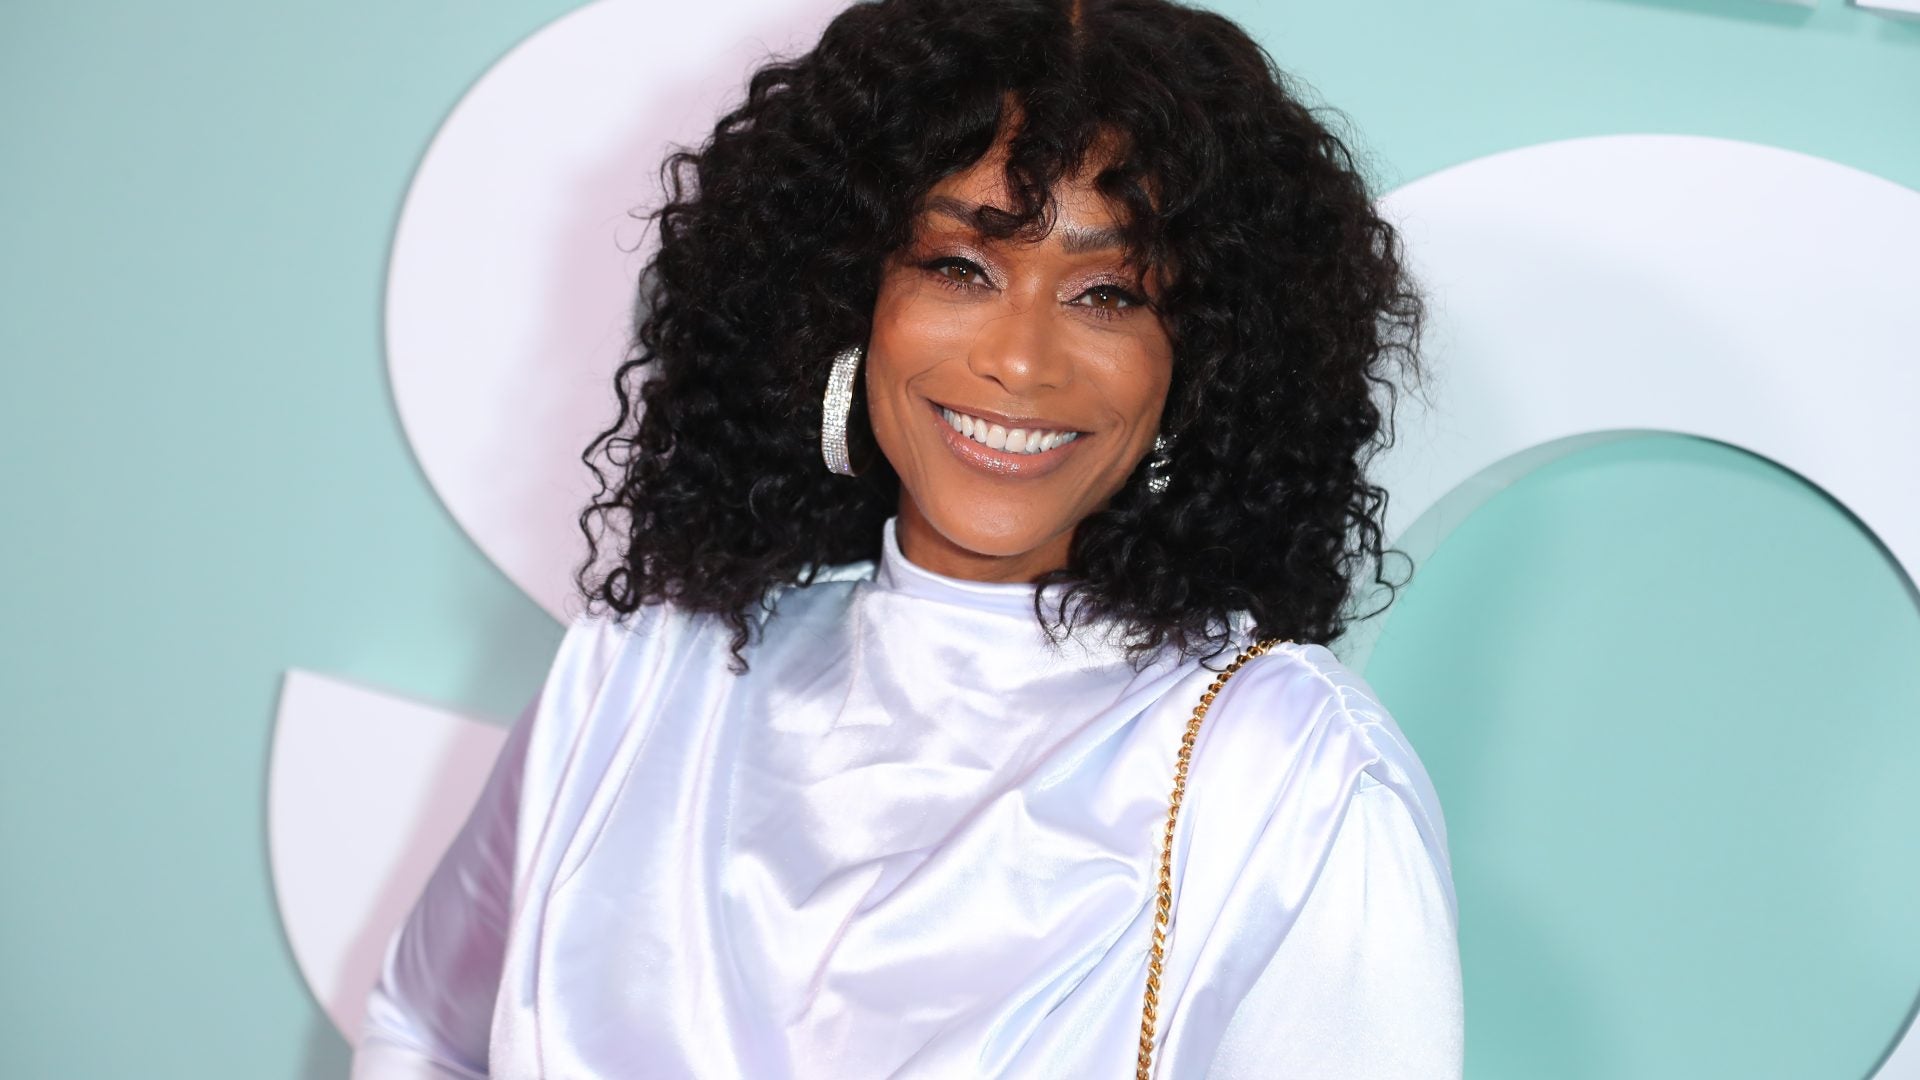 Tami Roman Explains Why She Is Fine With Her Husband Having A Child With Someone Else